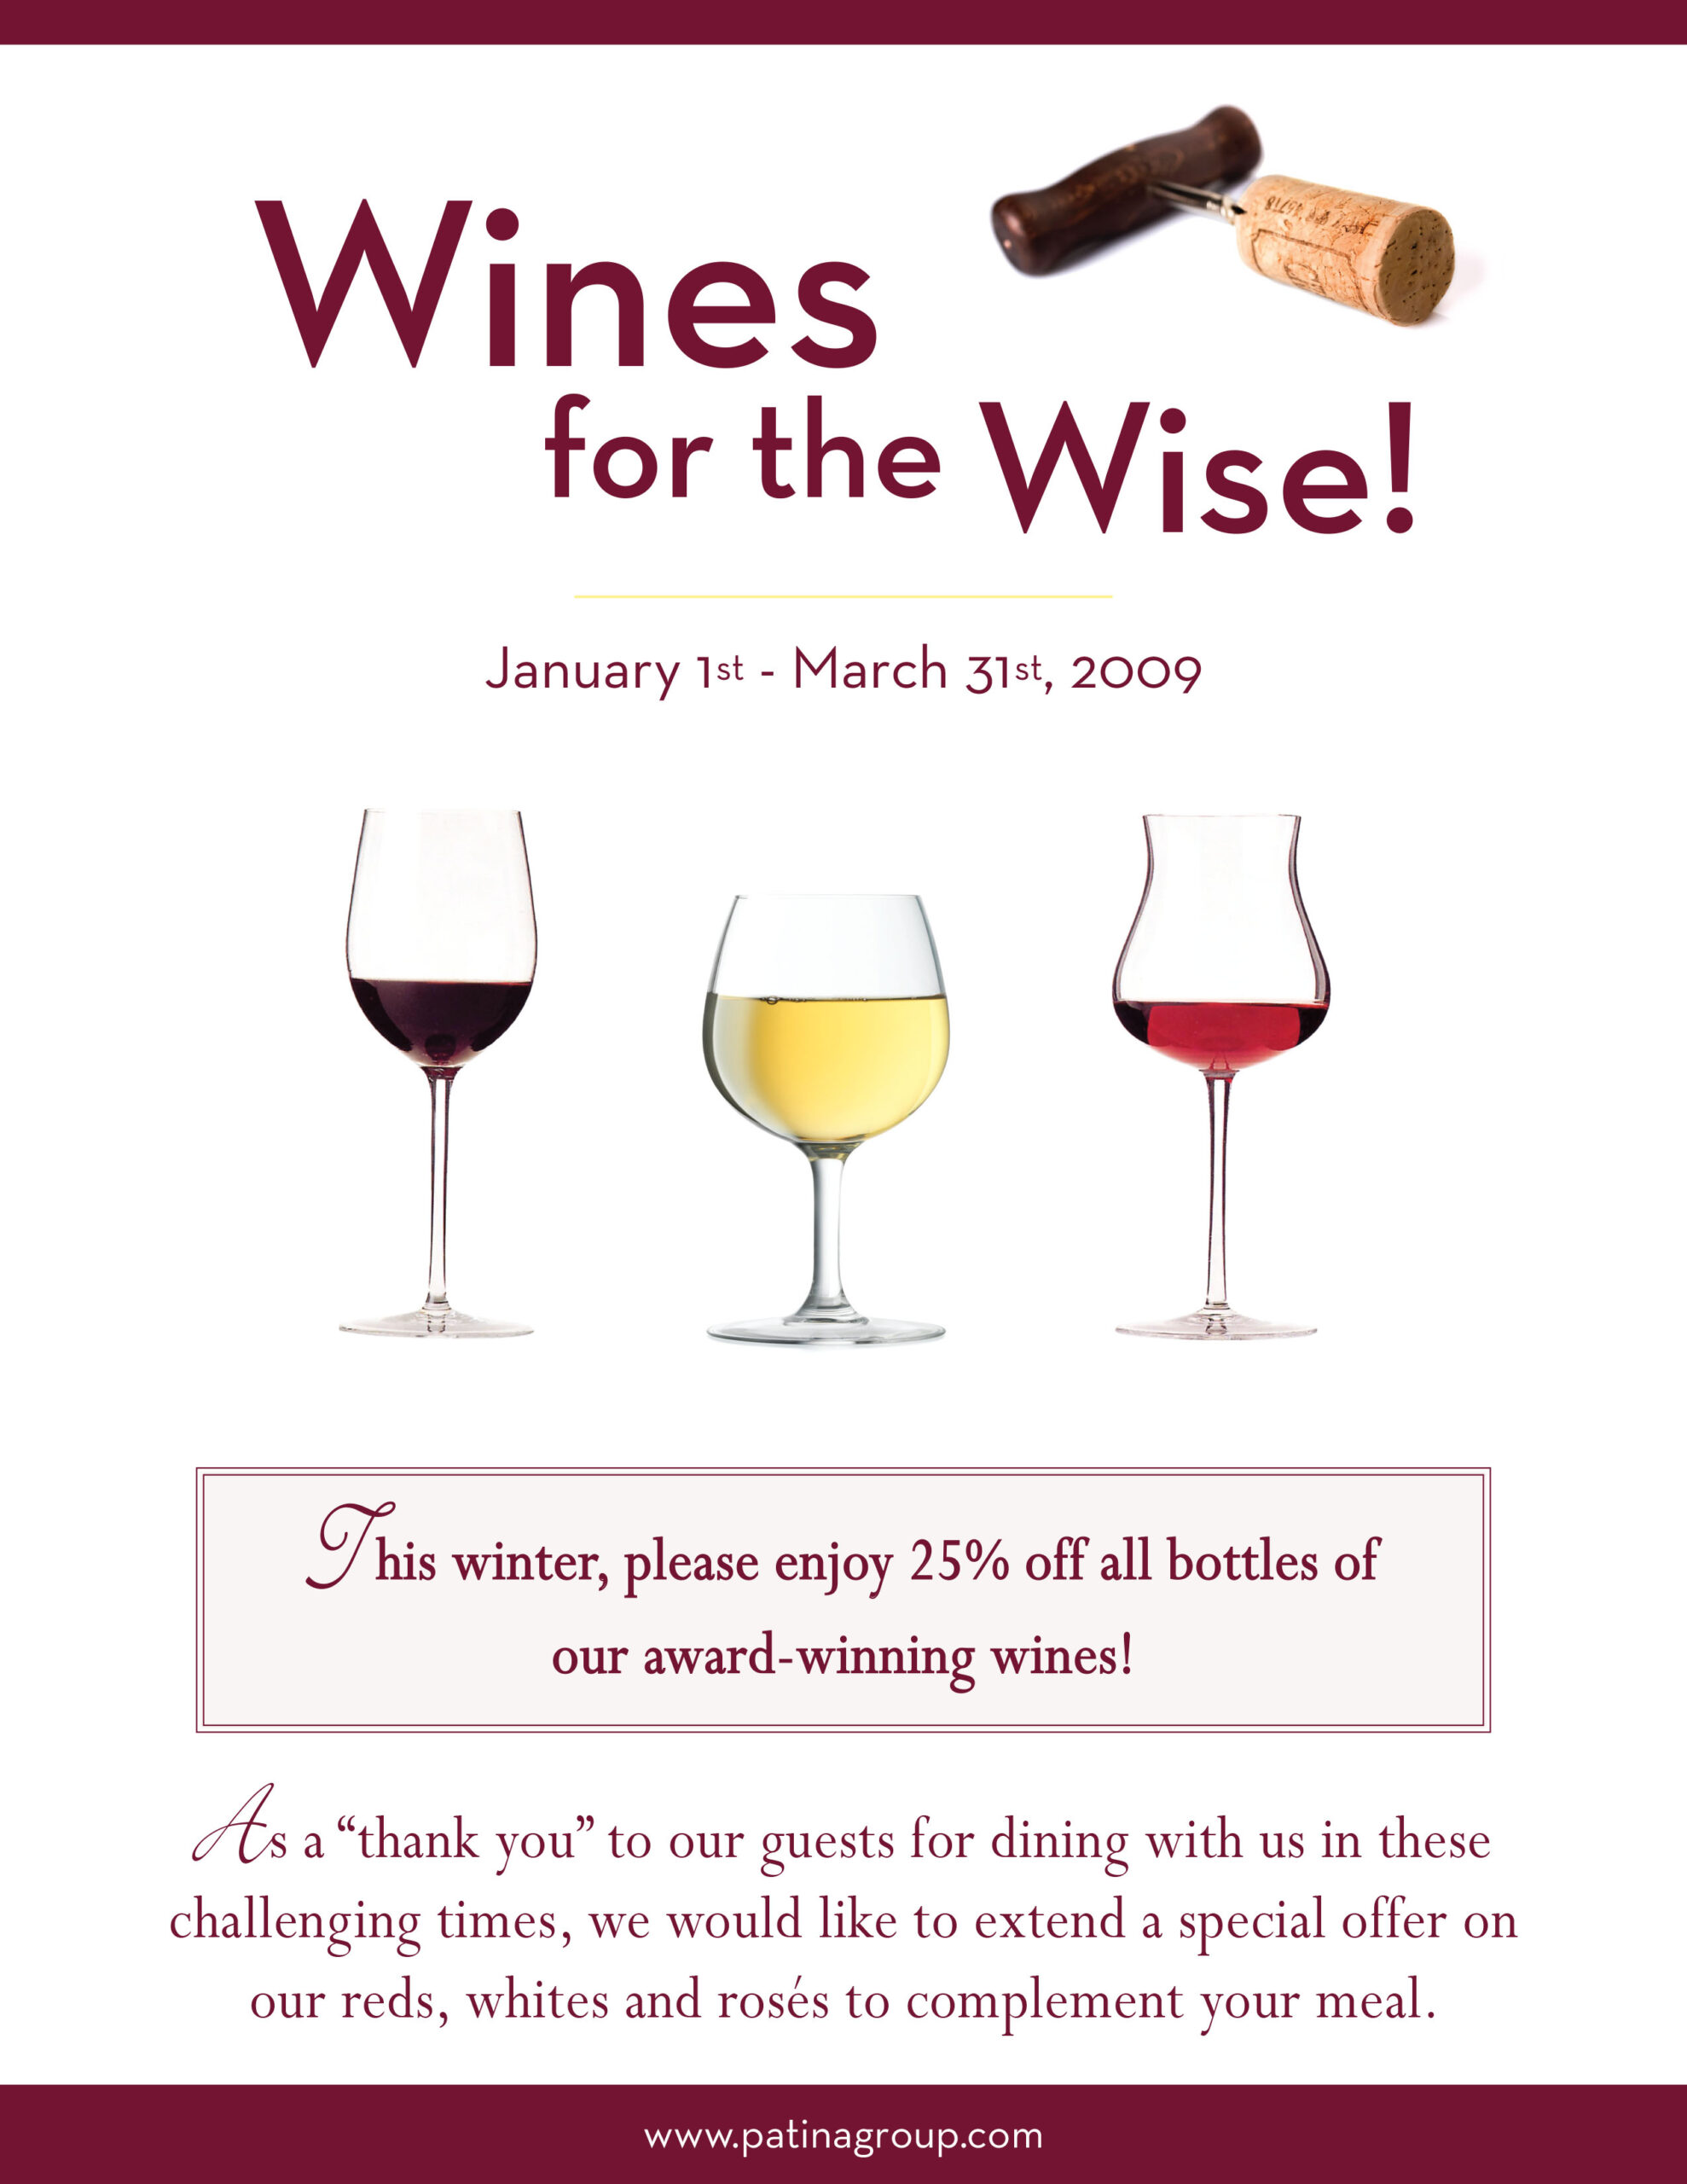 Food and Wine Wines for the Wise